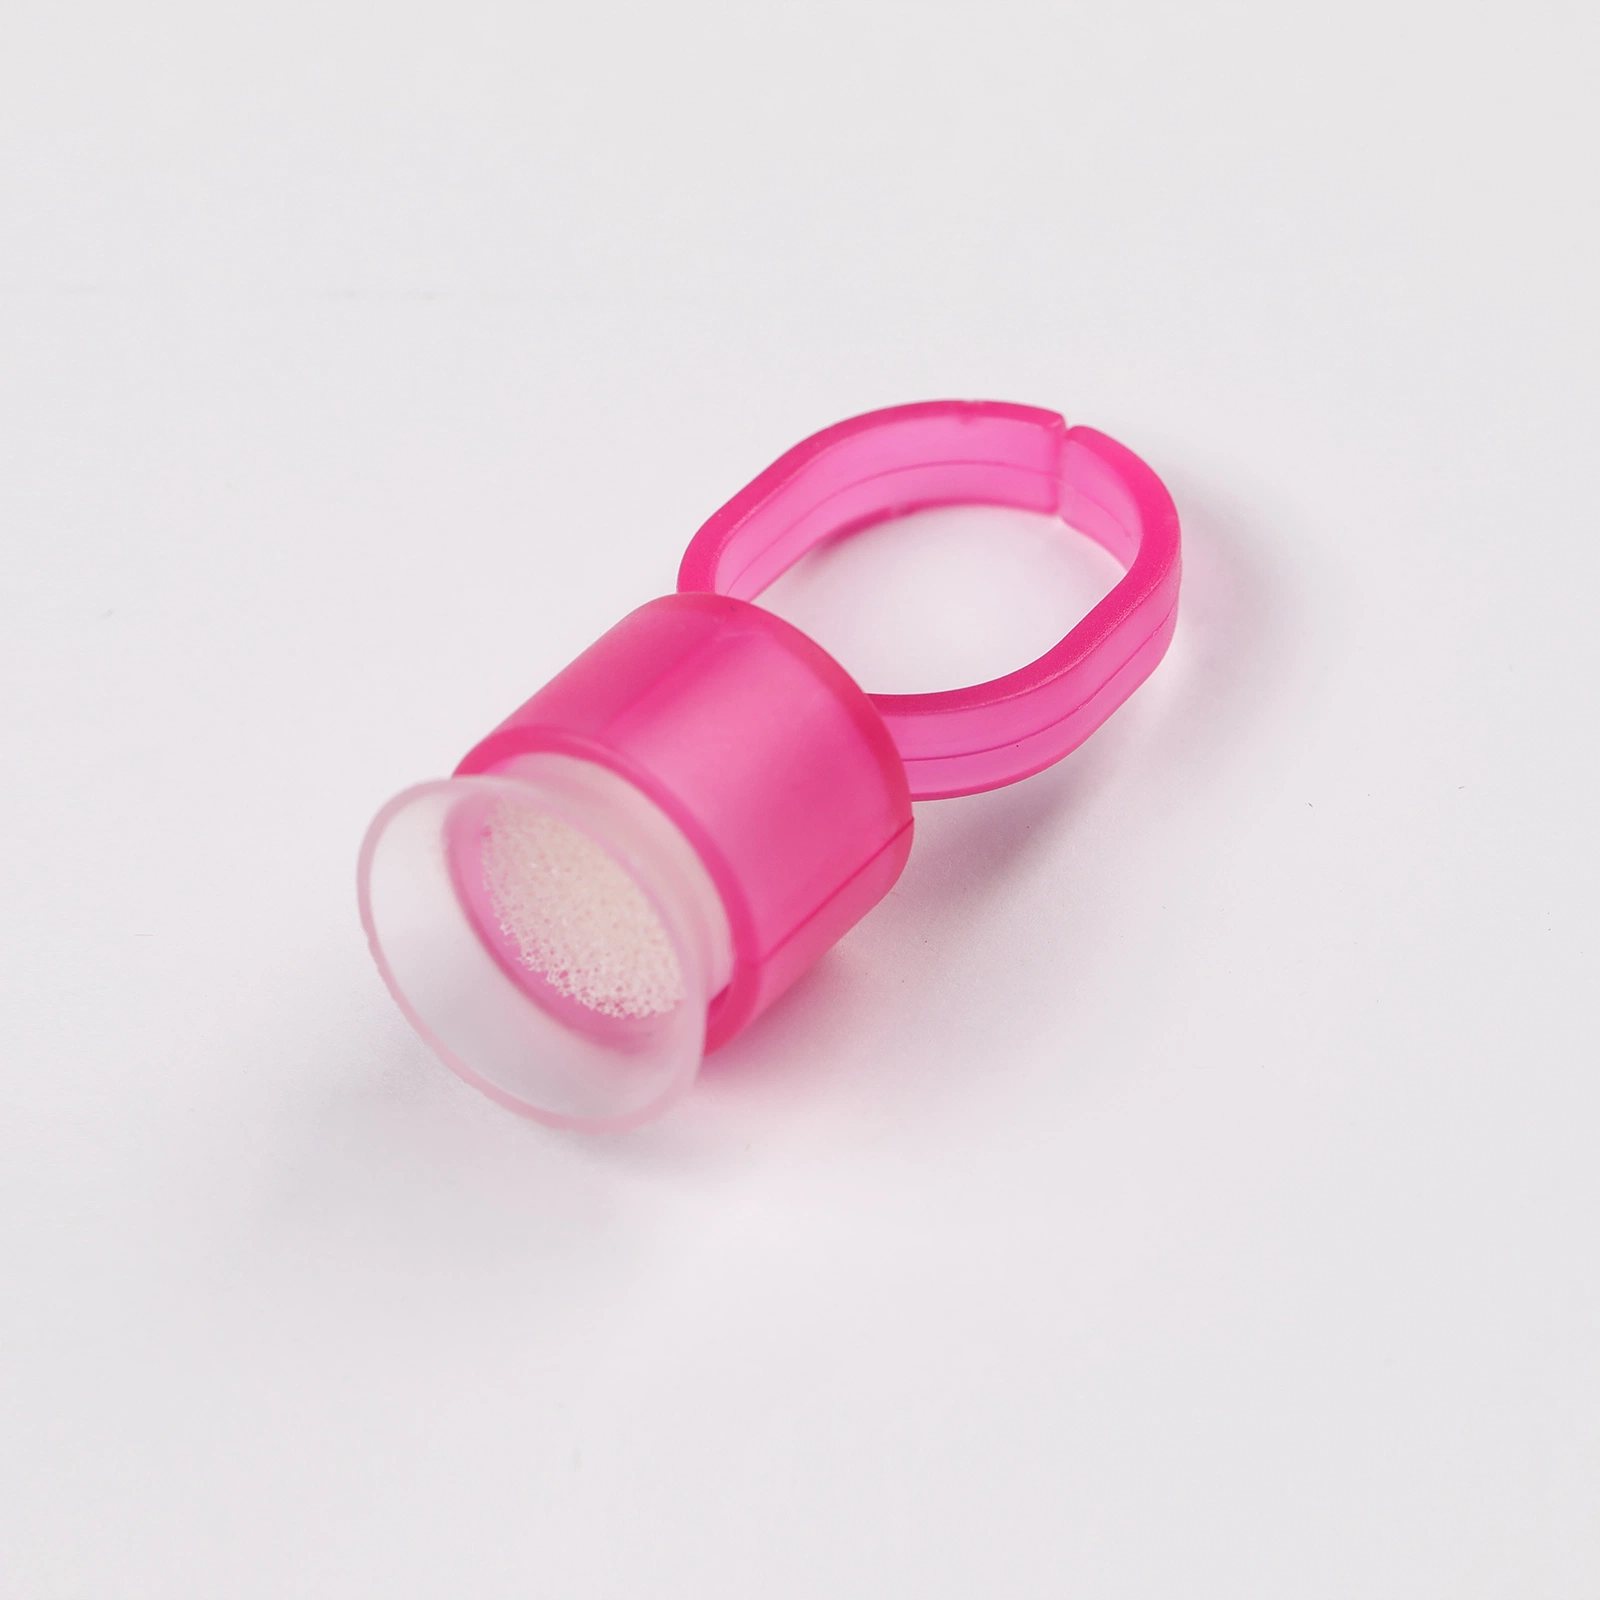 Microblading Pink Ring Tattoo Ink Cup Tattoo Supplies Makeup Accessories Tattoo Tools